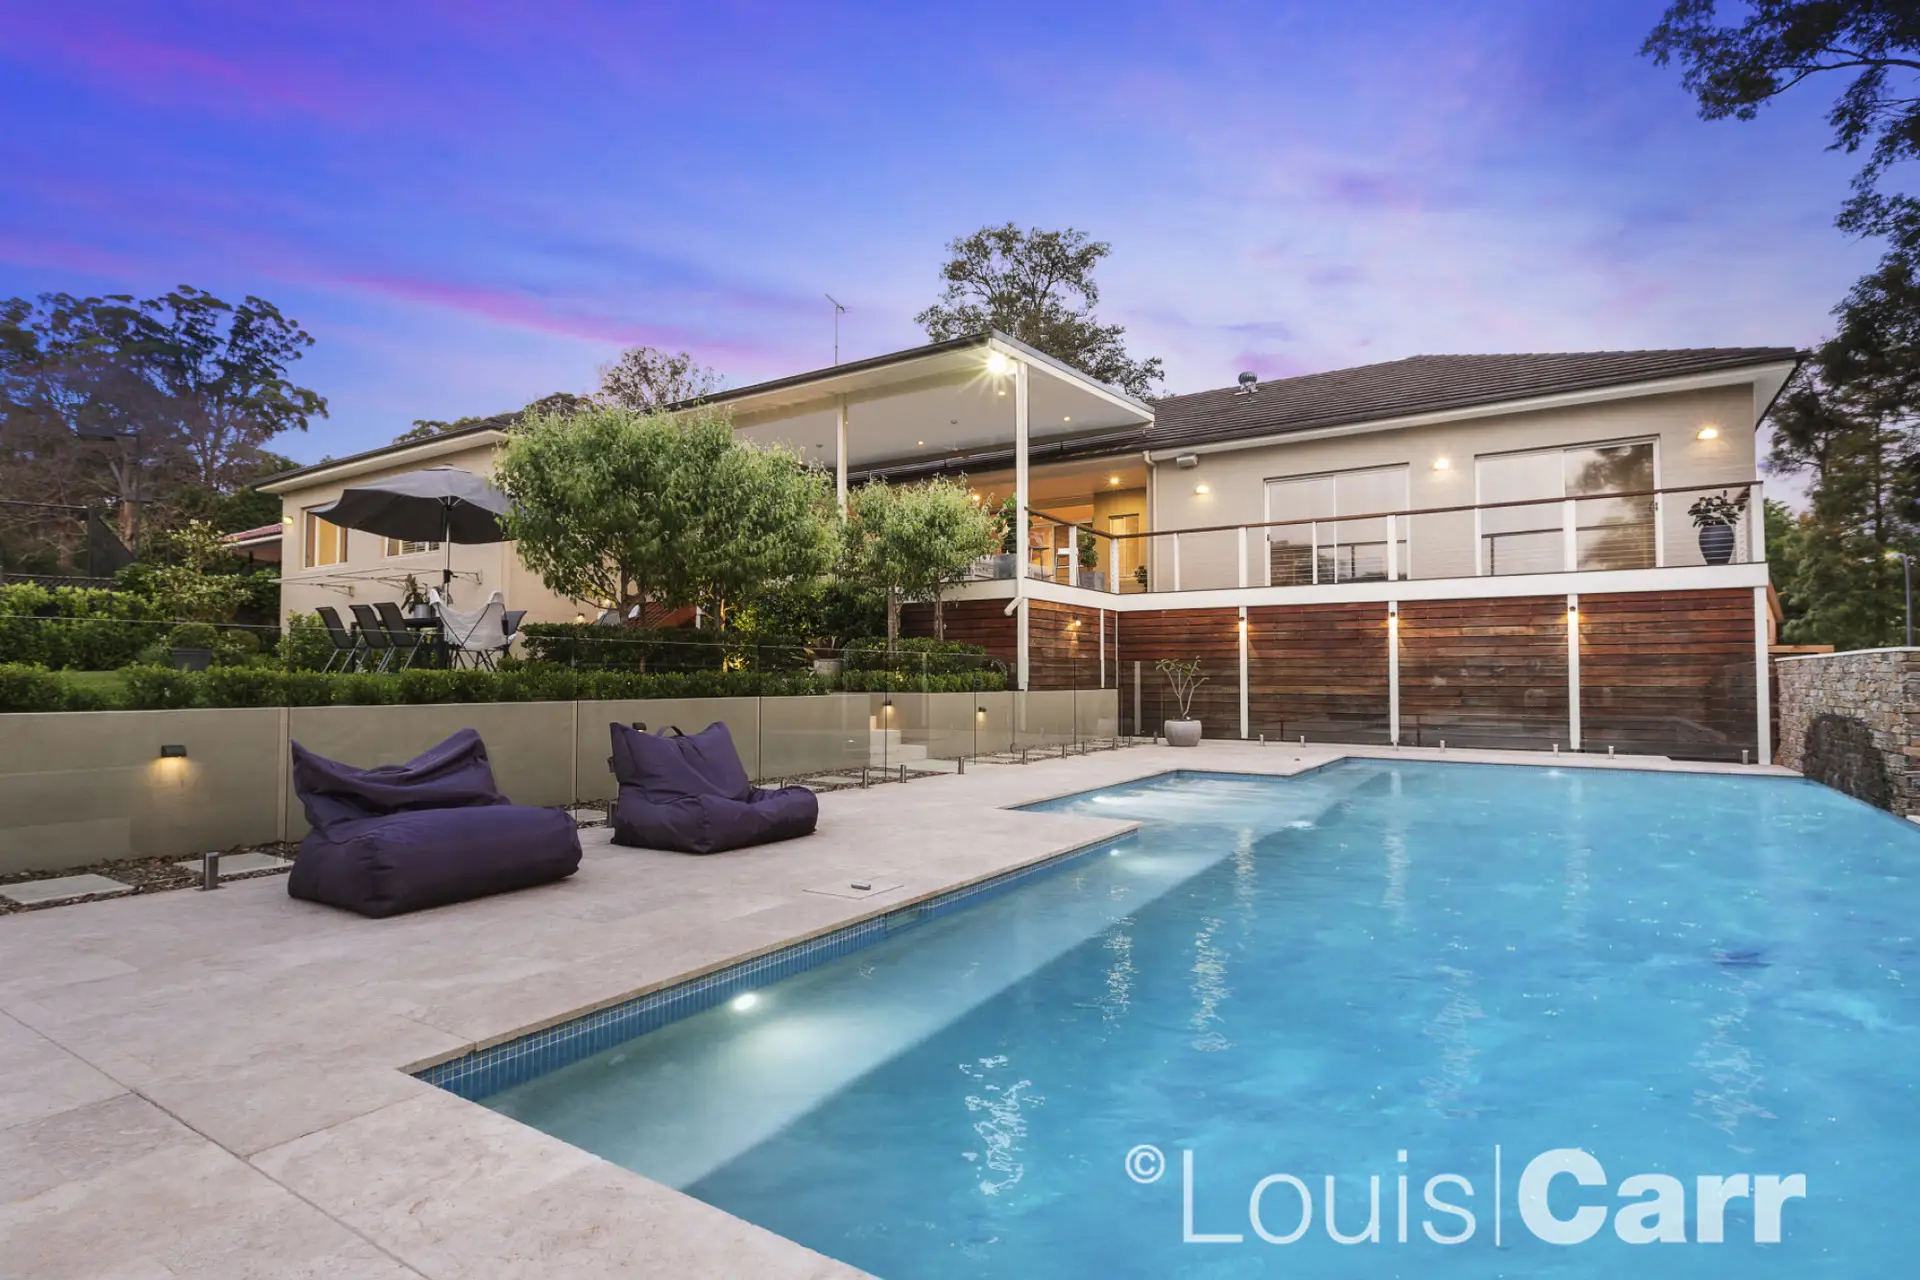 Photo #5: 8 Crego Road, Glenhaven - Sold by Louis Carr Real Estate